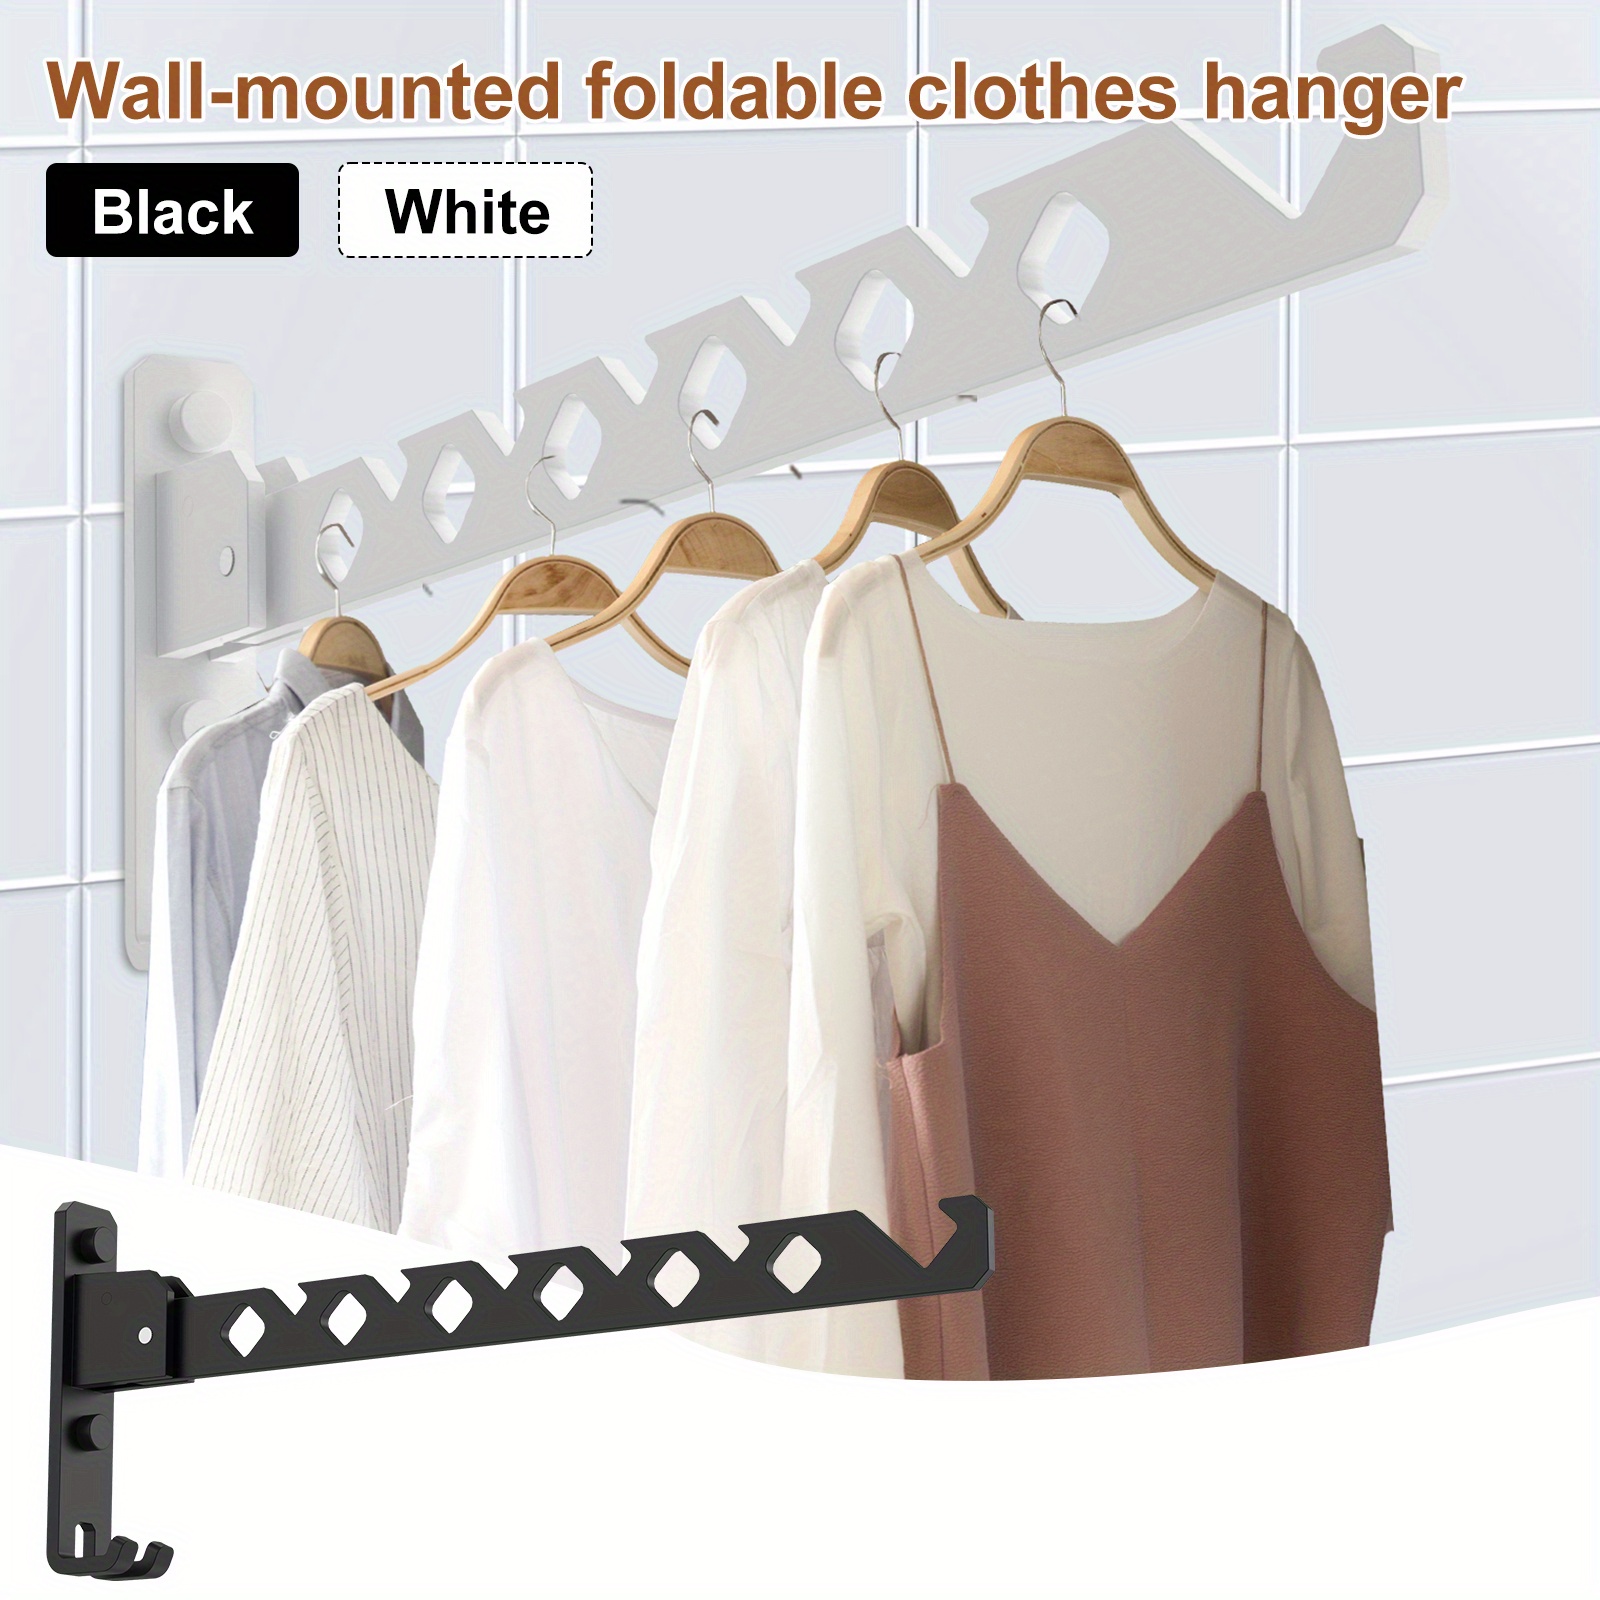 Cheap 6/8/10 Holes Wall Hanger Clothes Drying Rack Screw Stainless Steel  Folding Space Saving Clothes Hangers